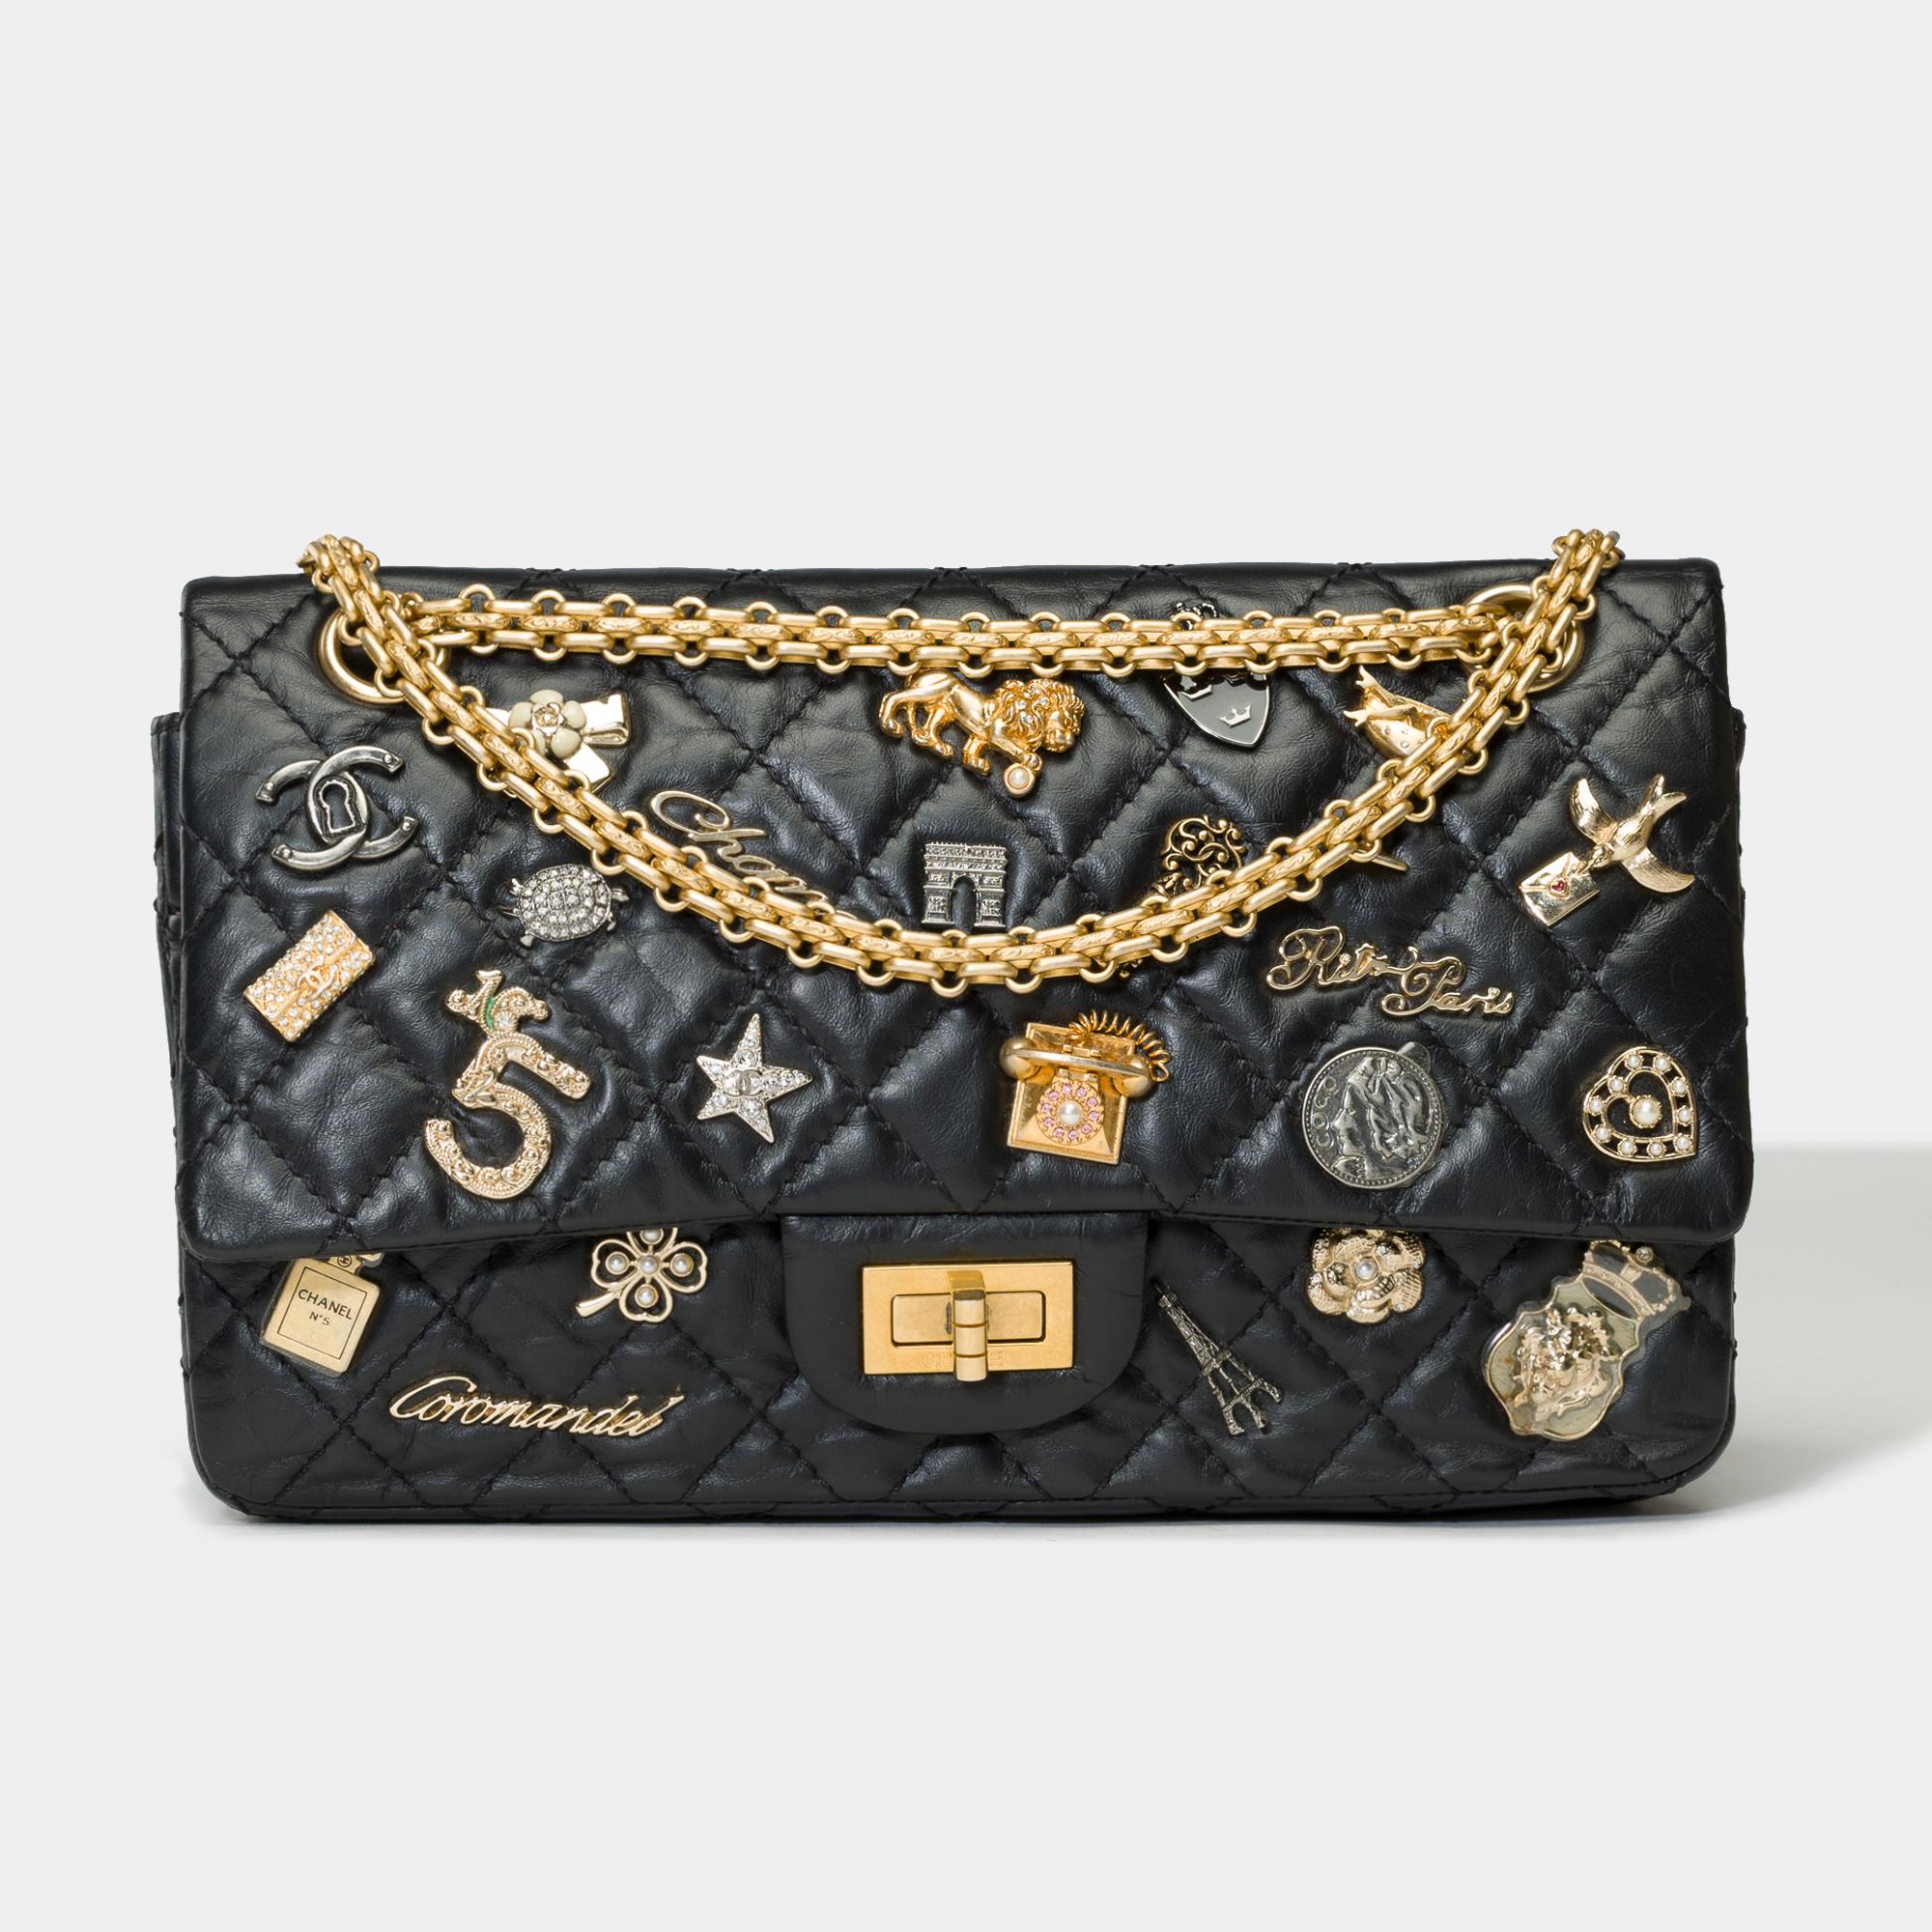 Lucky Charms 2.55 Chanel double flap shoulder bag in black quilted leather, AGHW For Sale